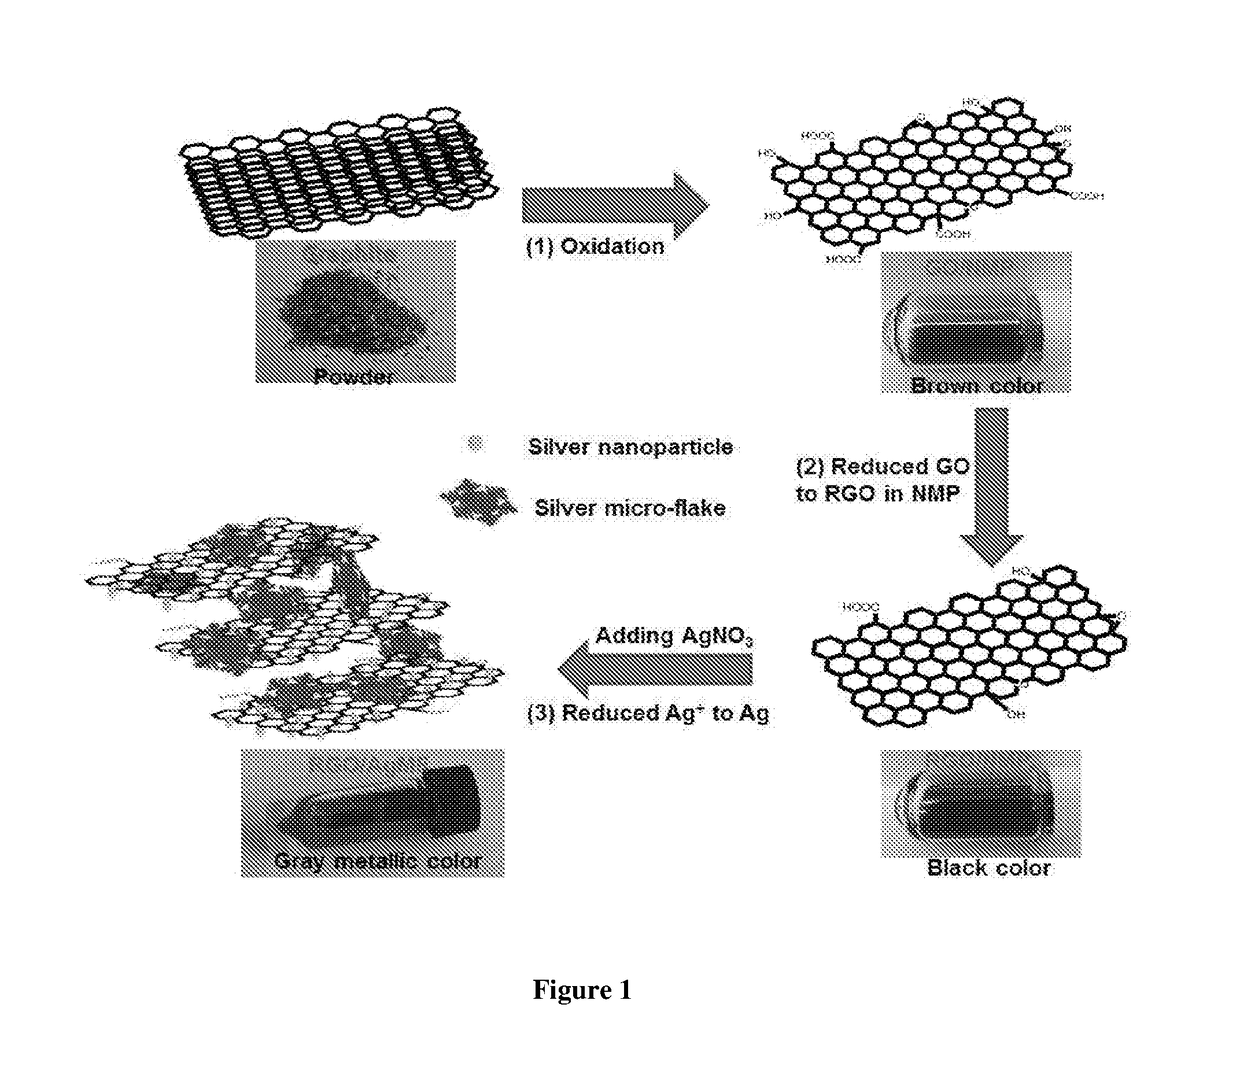 Compositions of graphene materials with metal nanostructures and microstructures and methods of making and using including pressure sensors